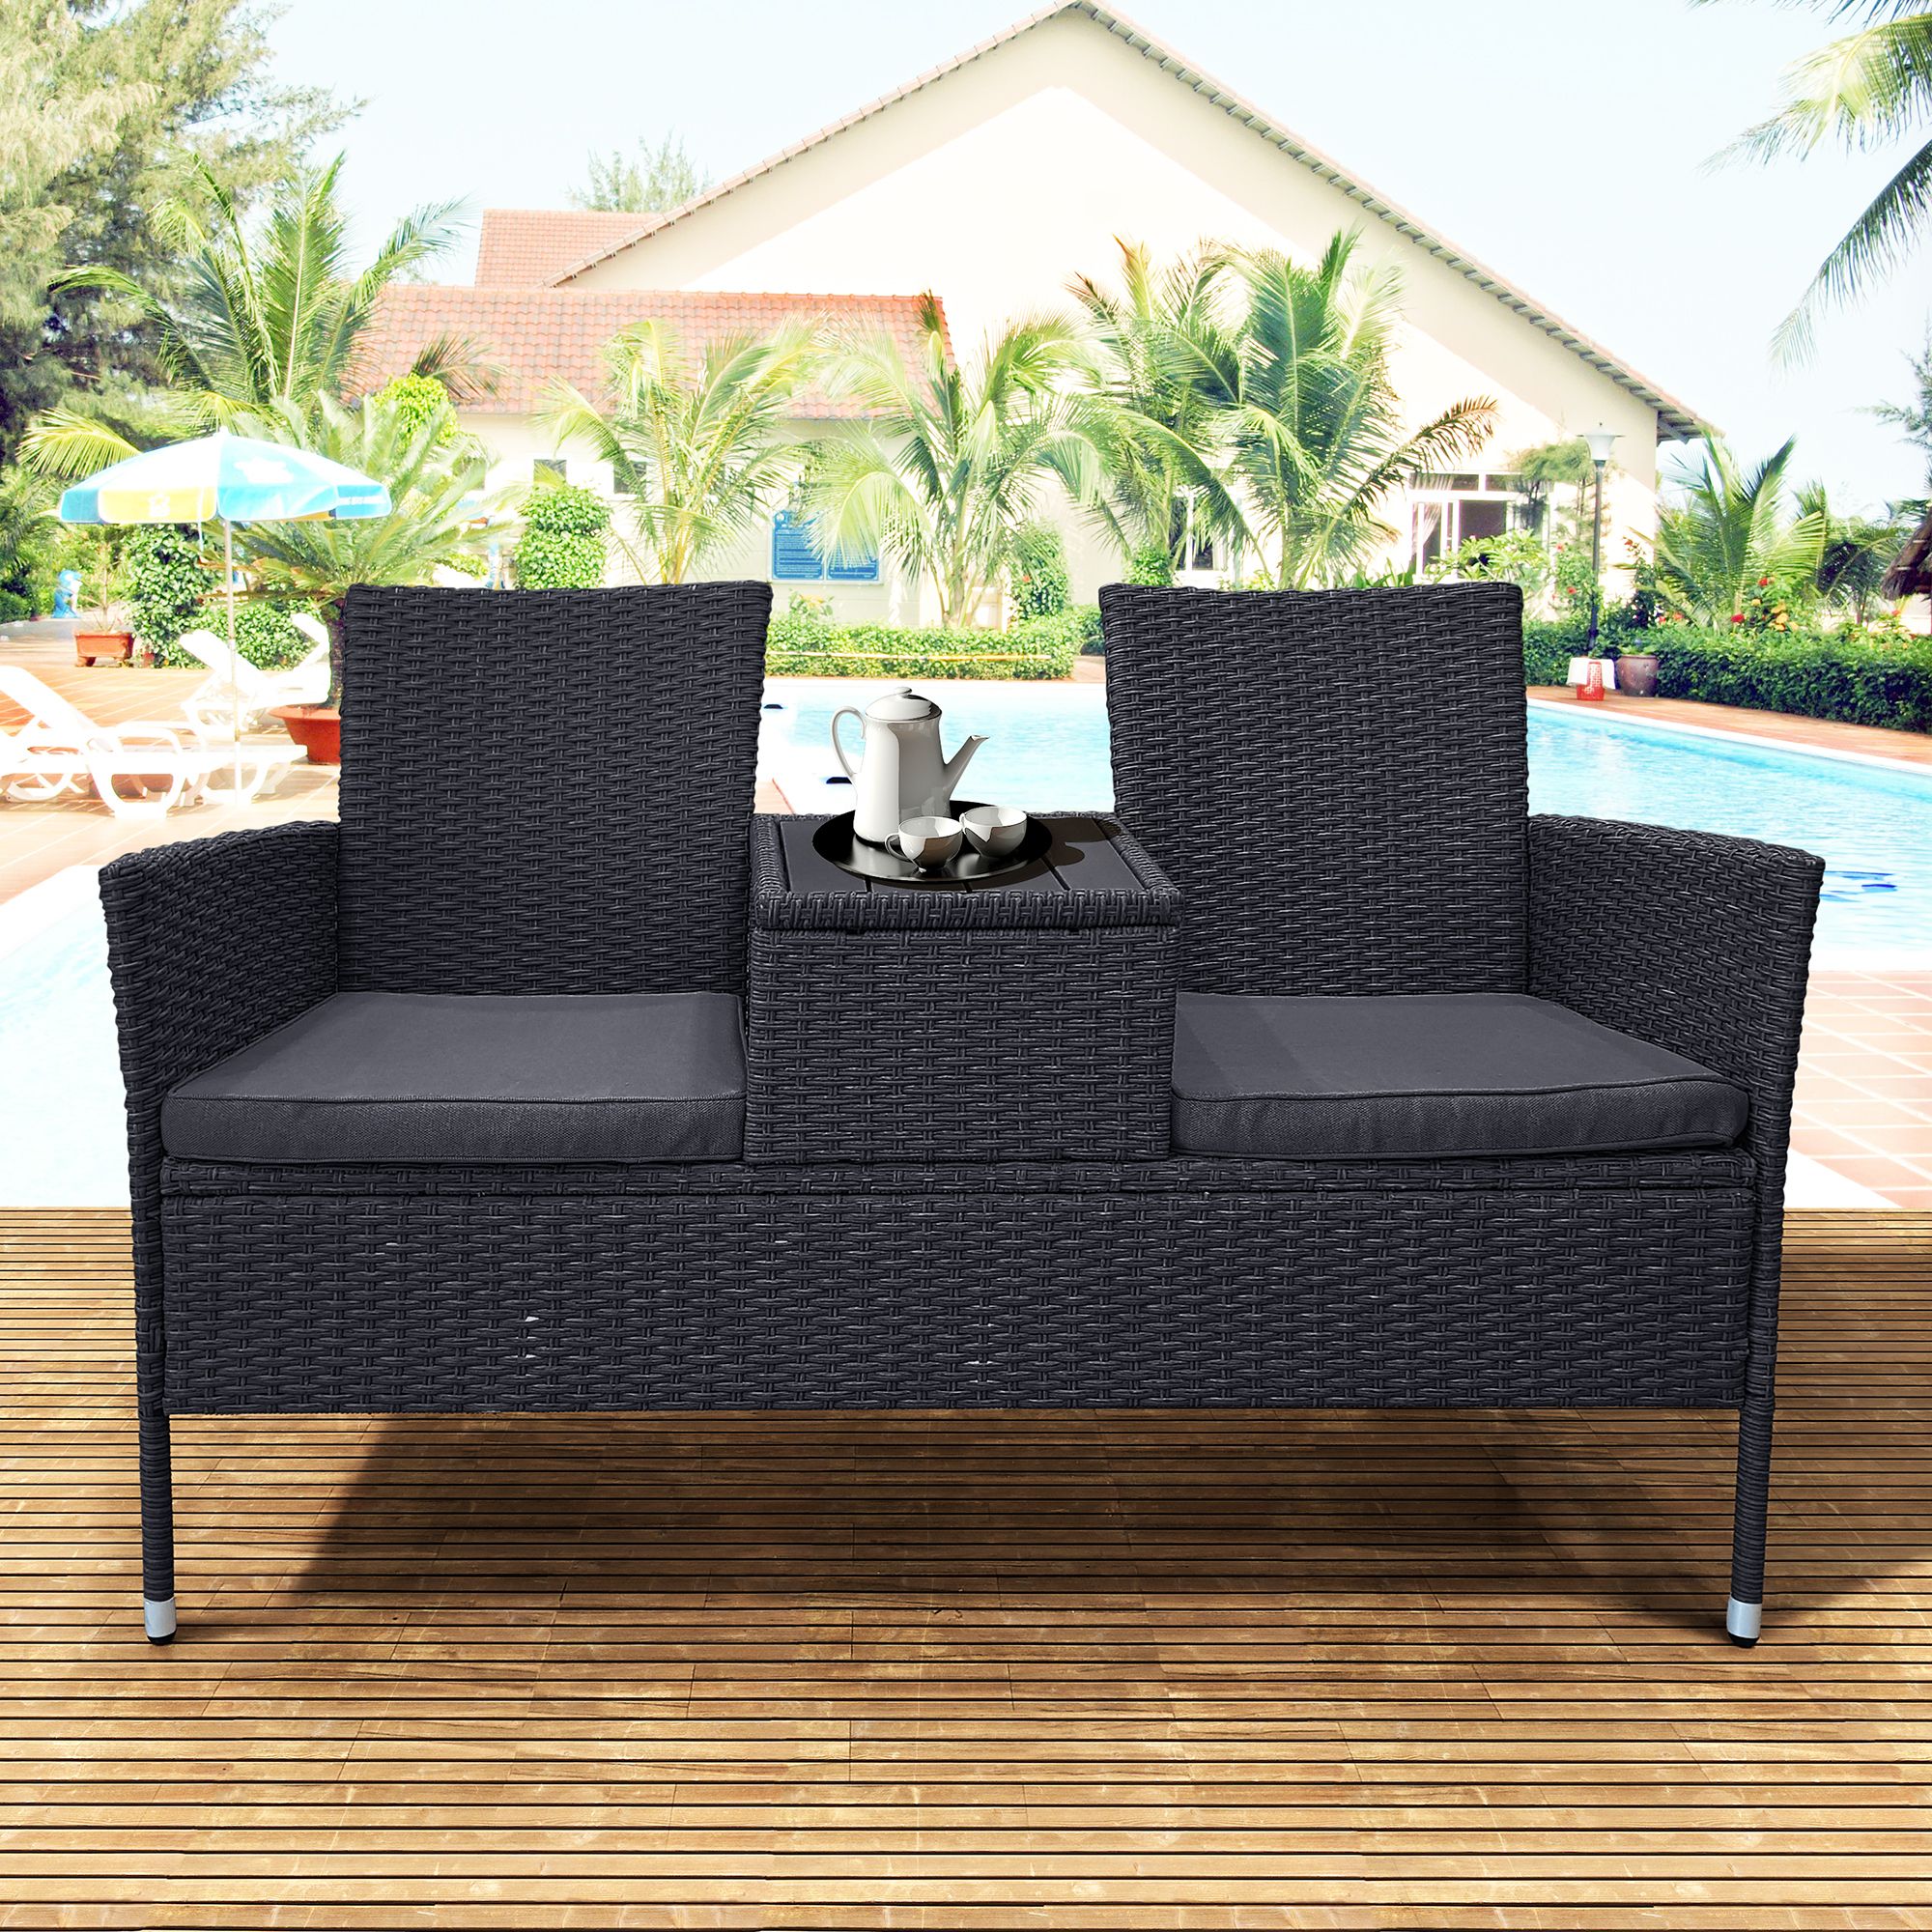 Clearance! Outdoor Conversation Set, Rattan Wicker 2 Person Sofa With Regard To Black And Tan Rattan Console Tables (View 2 of 20)